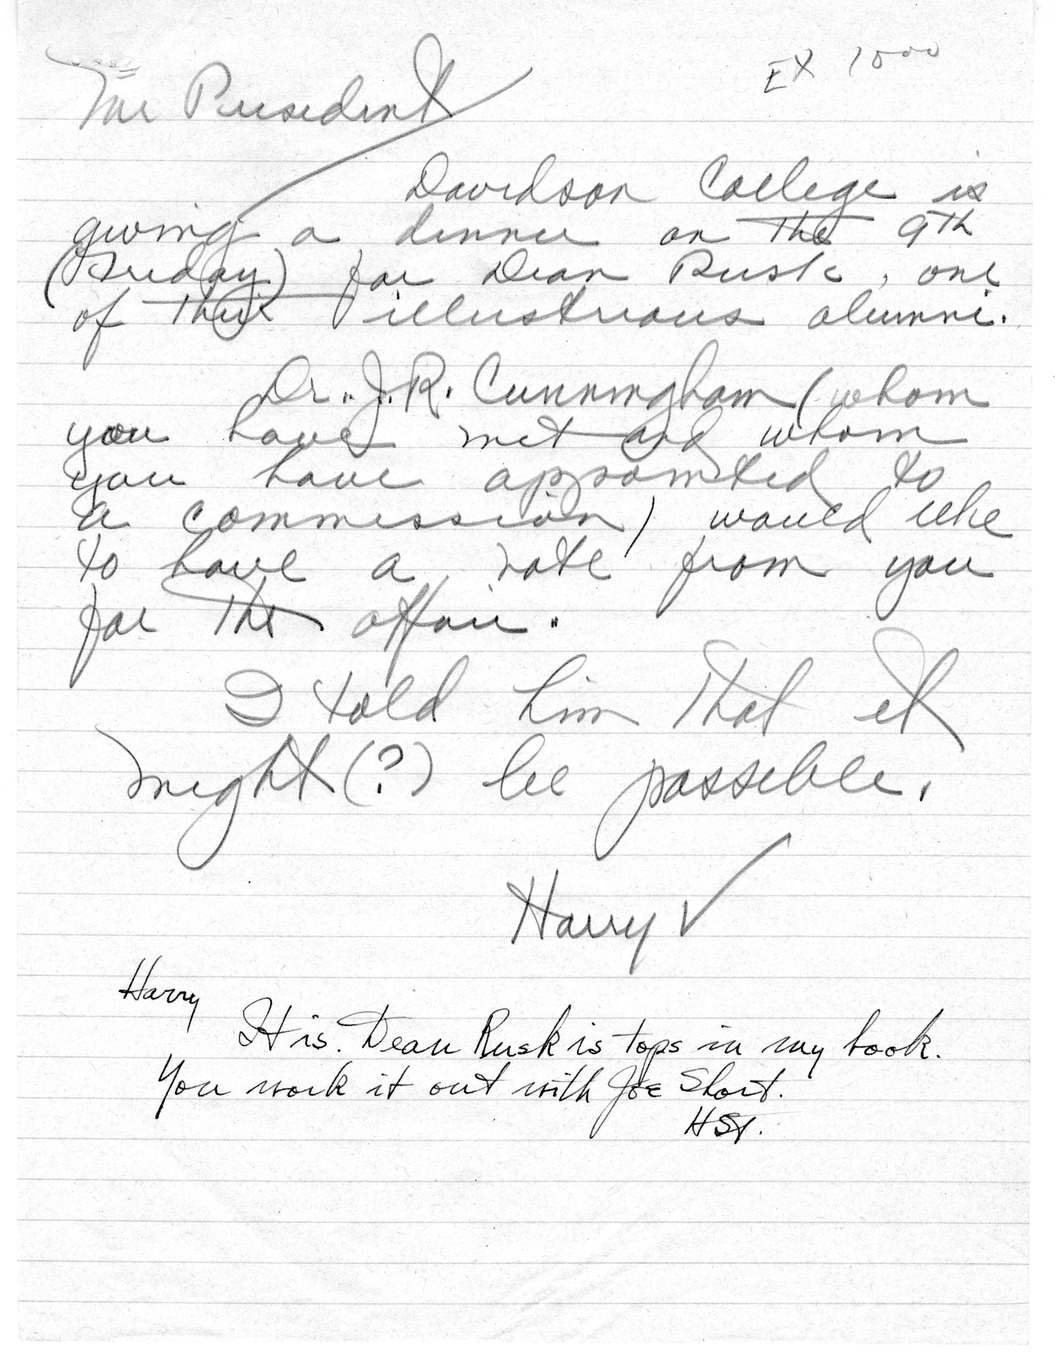 Letter from President Harry S. Truman to Dr. J. R. Cunningham, with Related Material